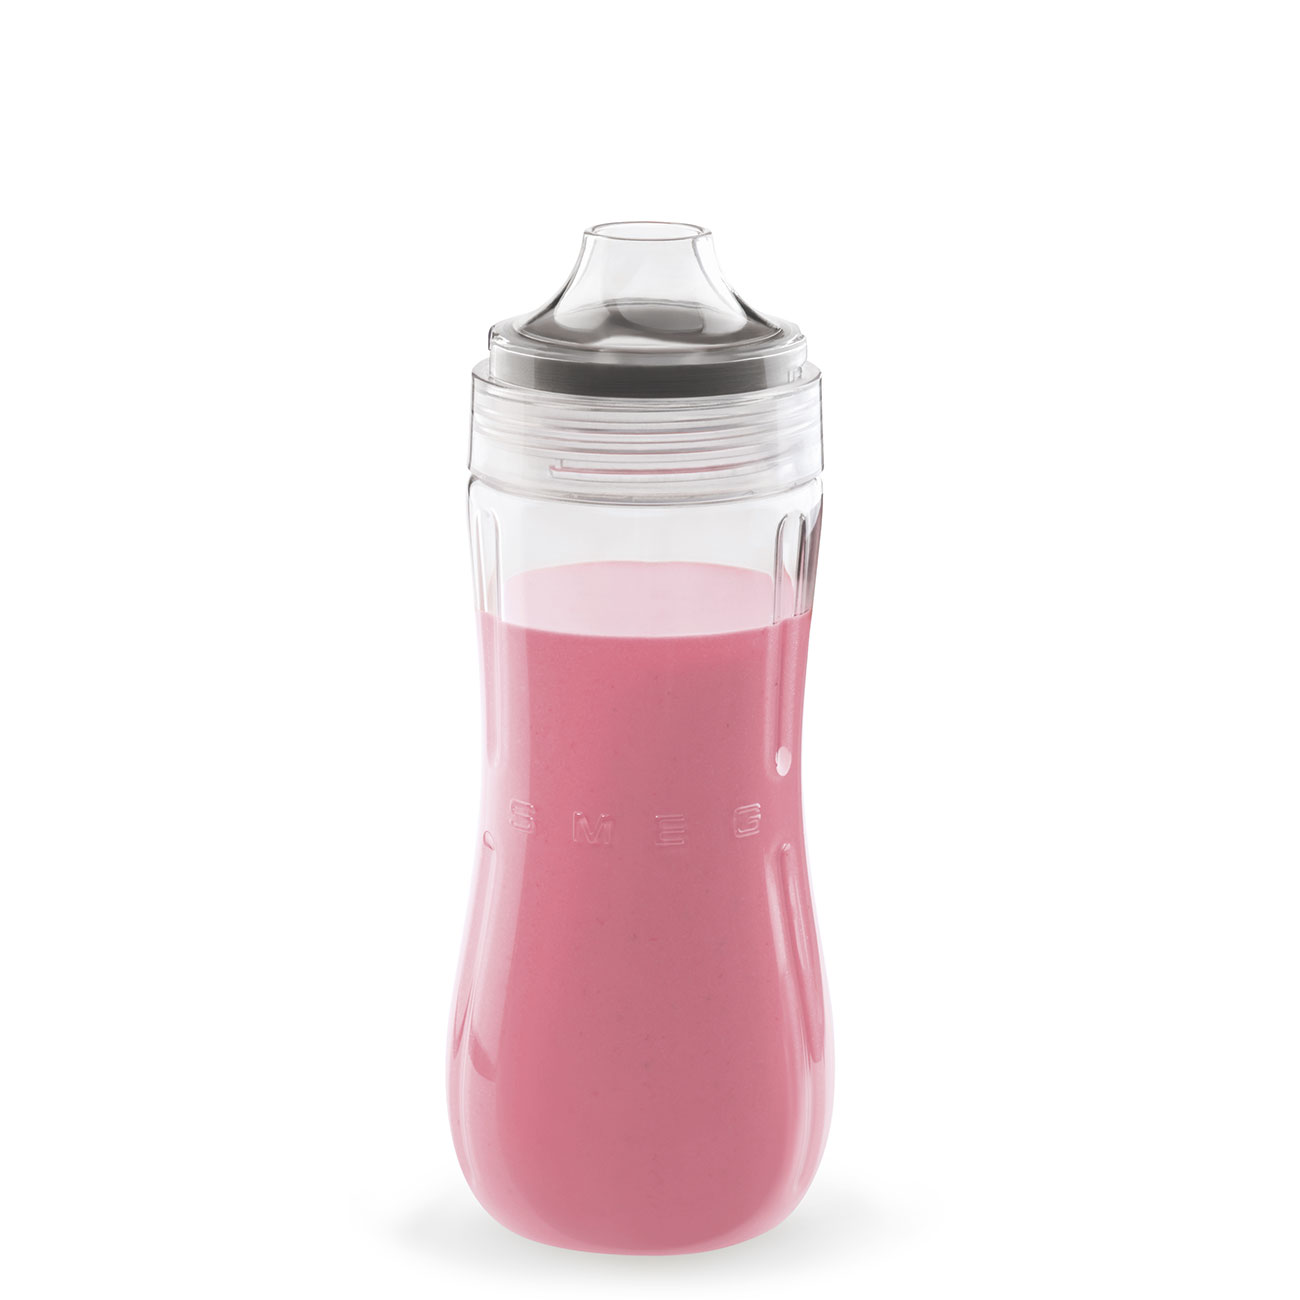 Bottle To Go with blades accessory for Smeg Blender - BGF03_7